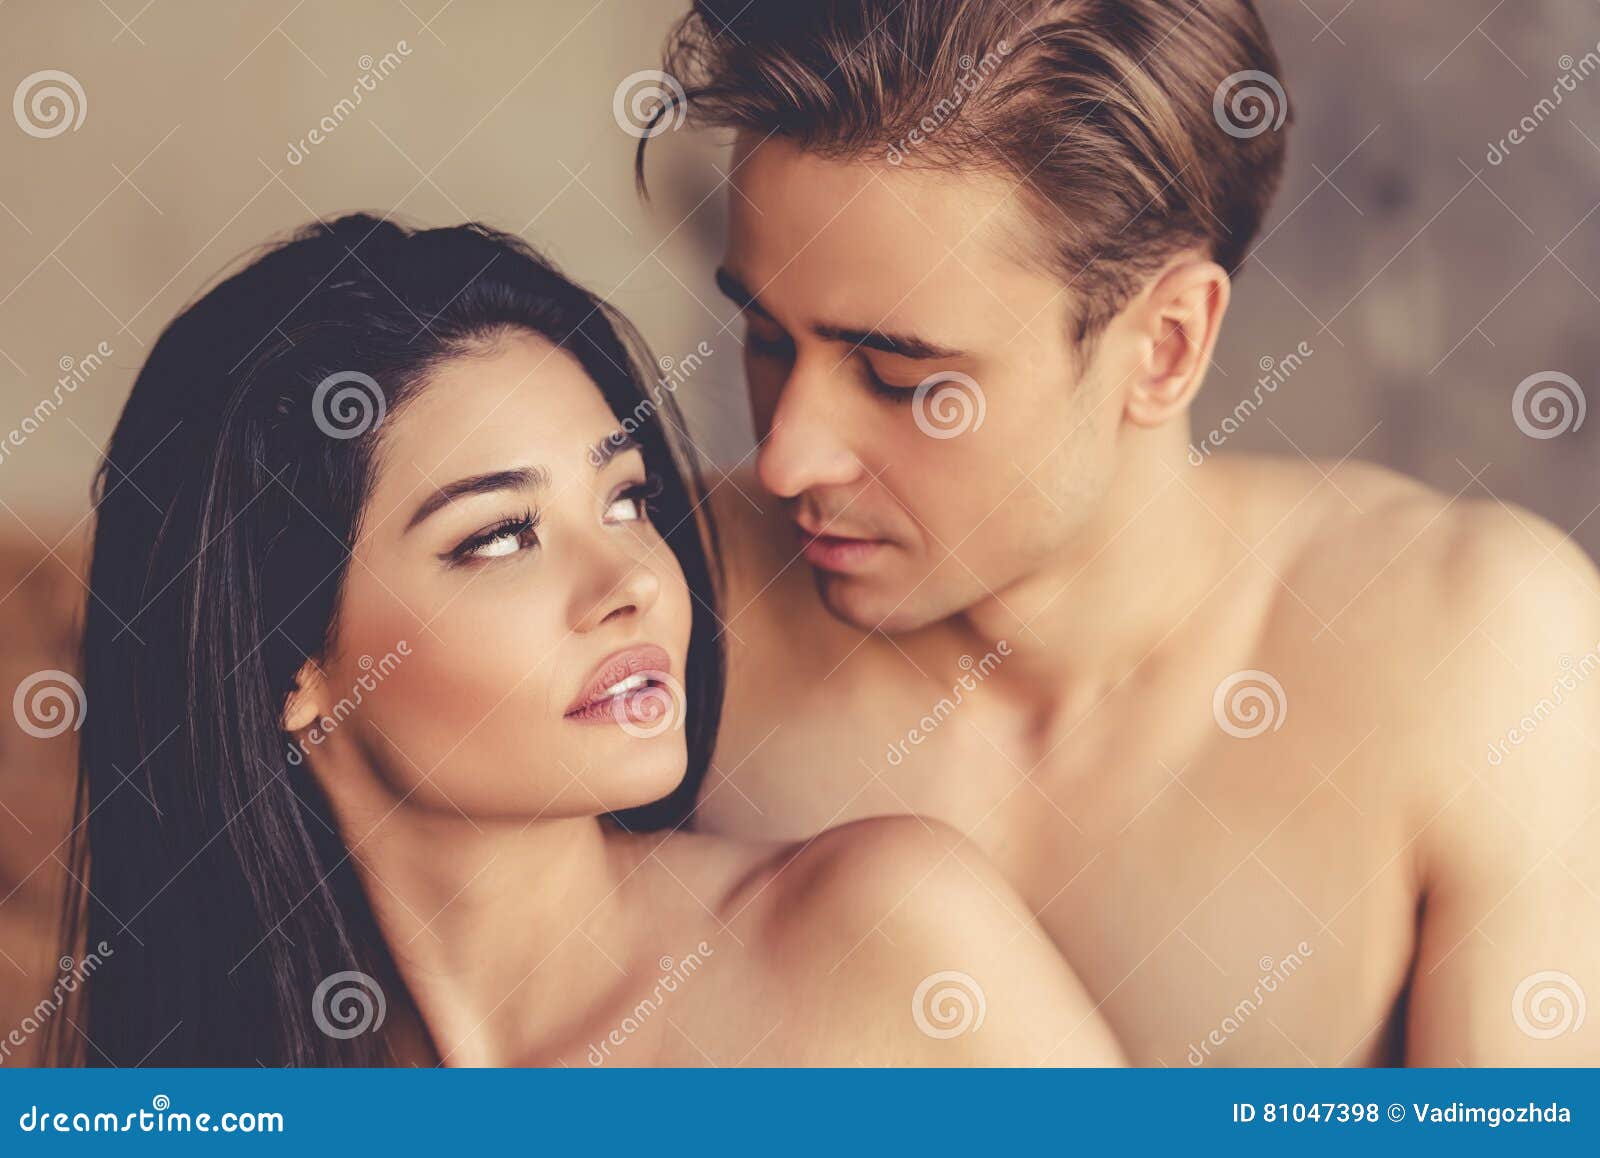 bonnie santa recommends beautiful young couple sex pic